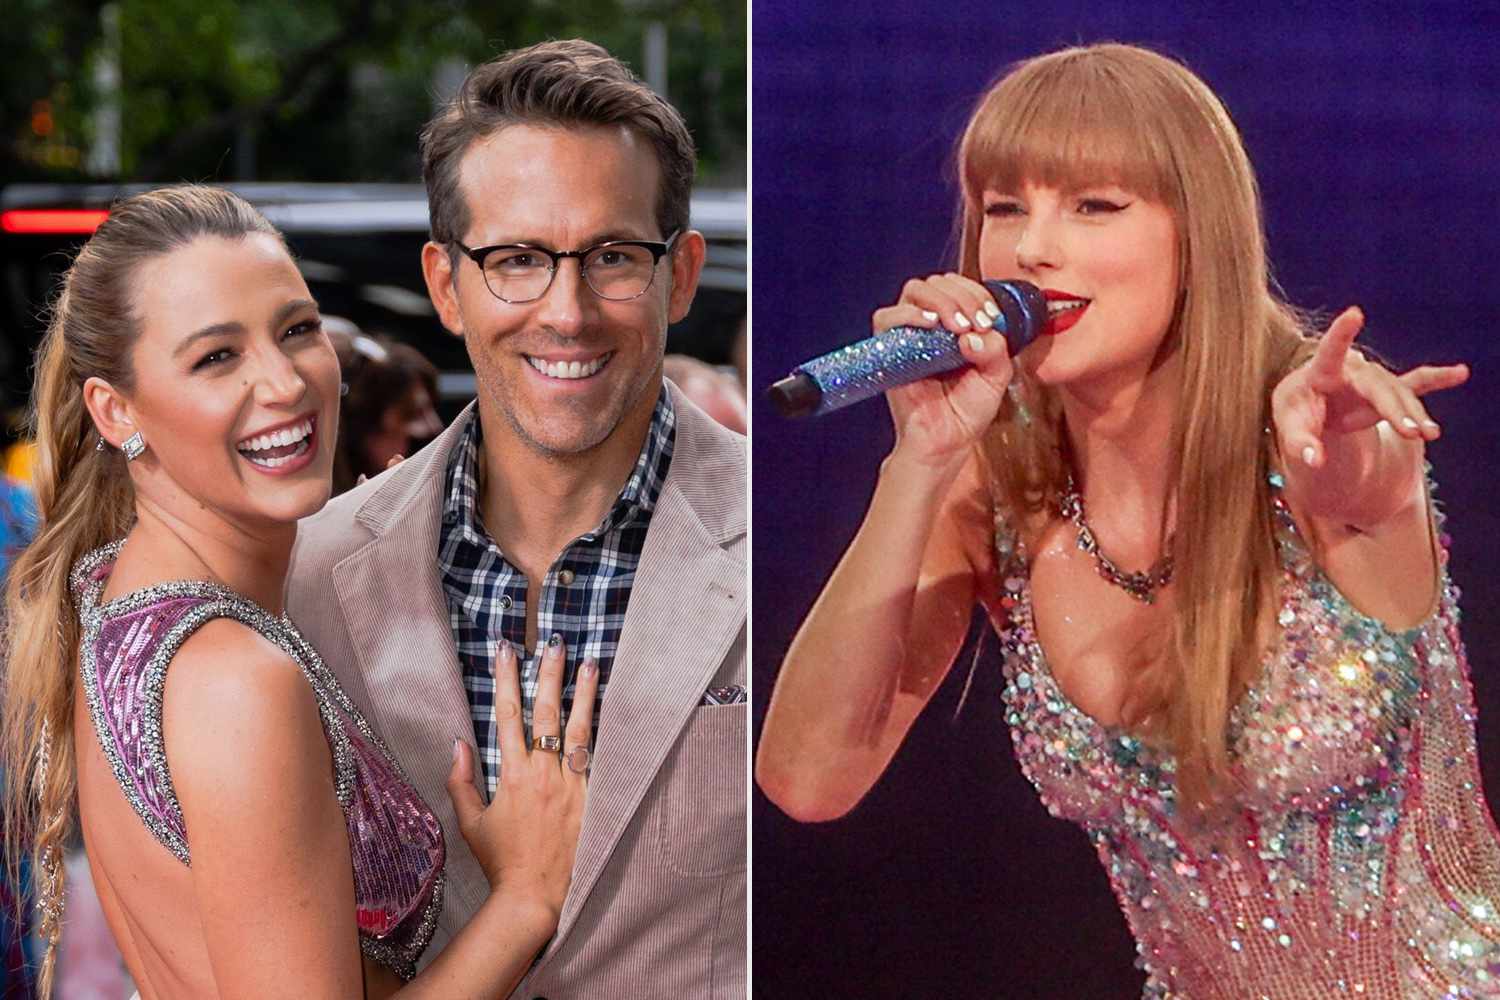 Ryan Reynolds and Blake Lively Take Selfie and Kiss While Taylor Swift Performs ‘Lover’ in Madrid